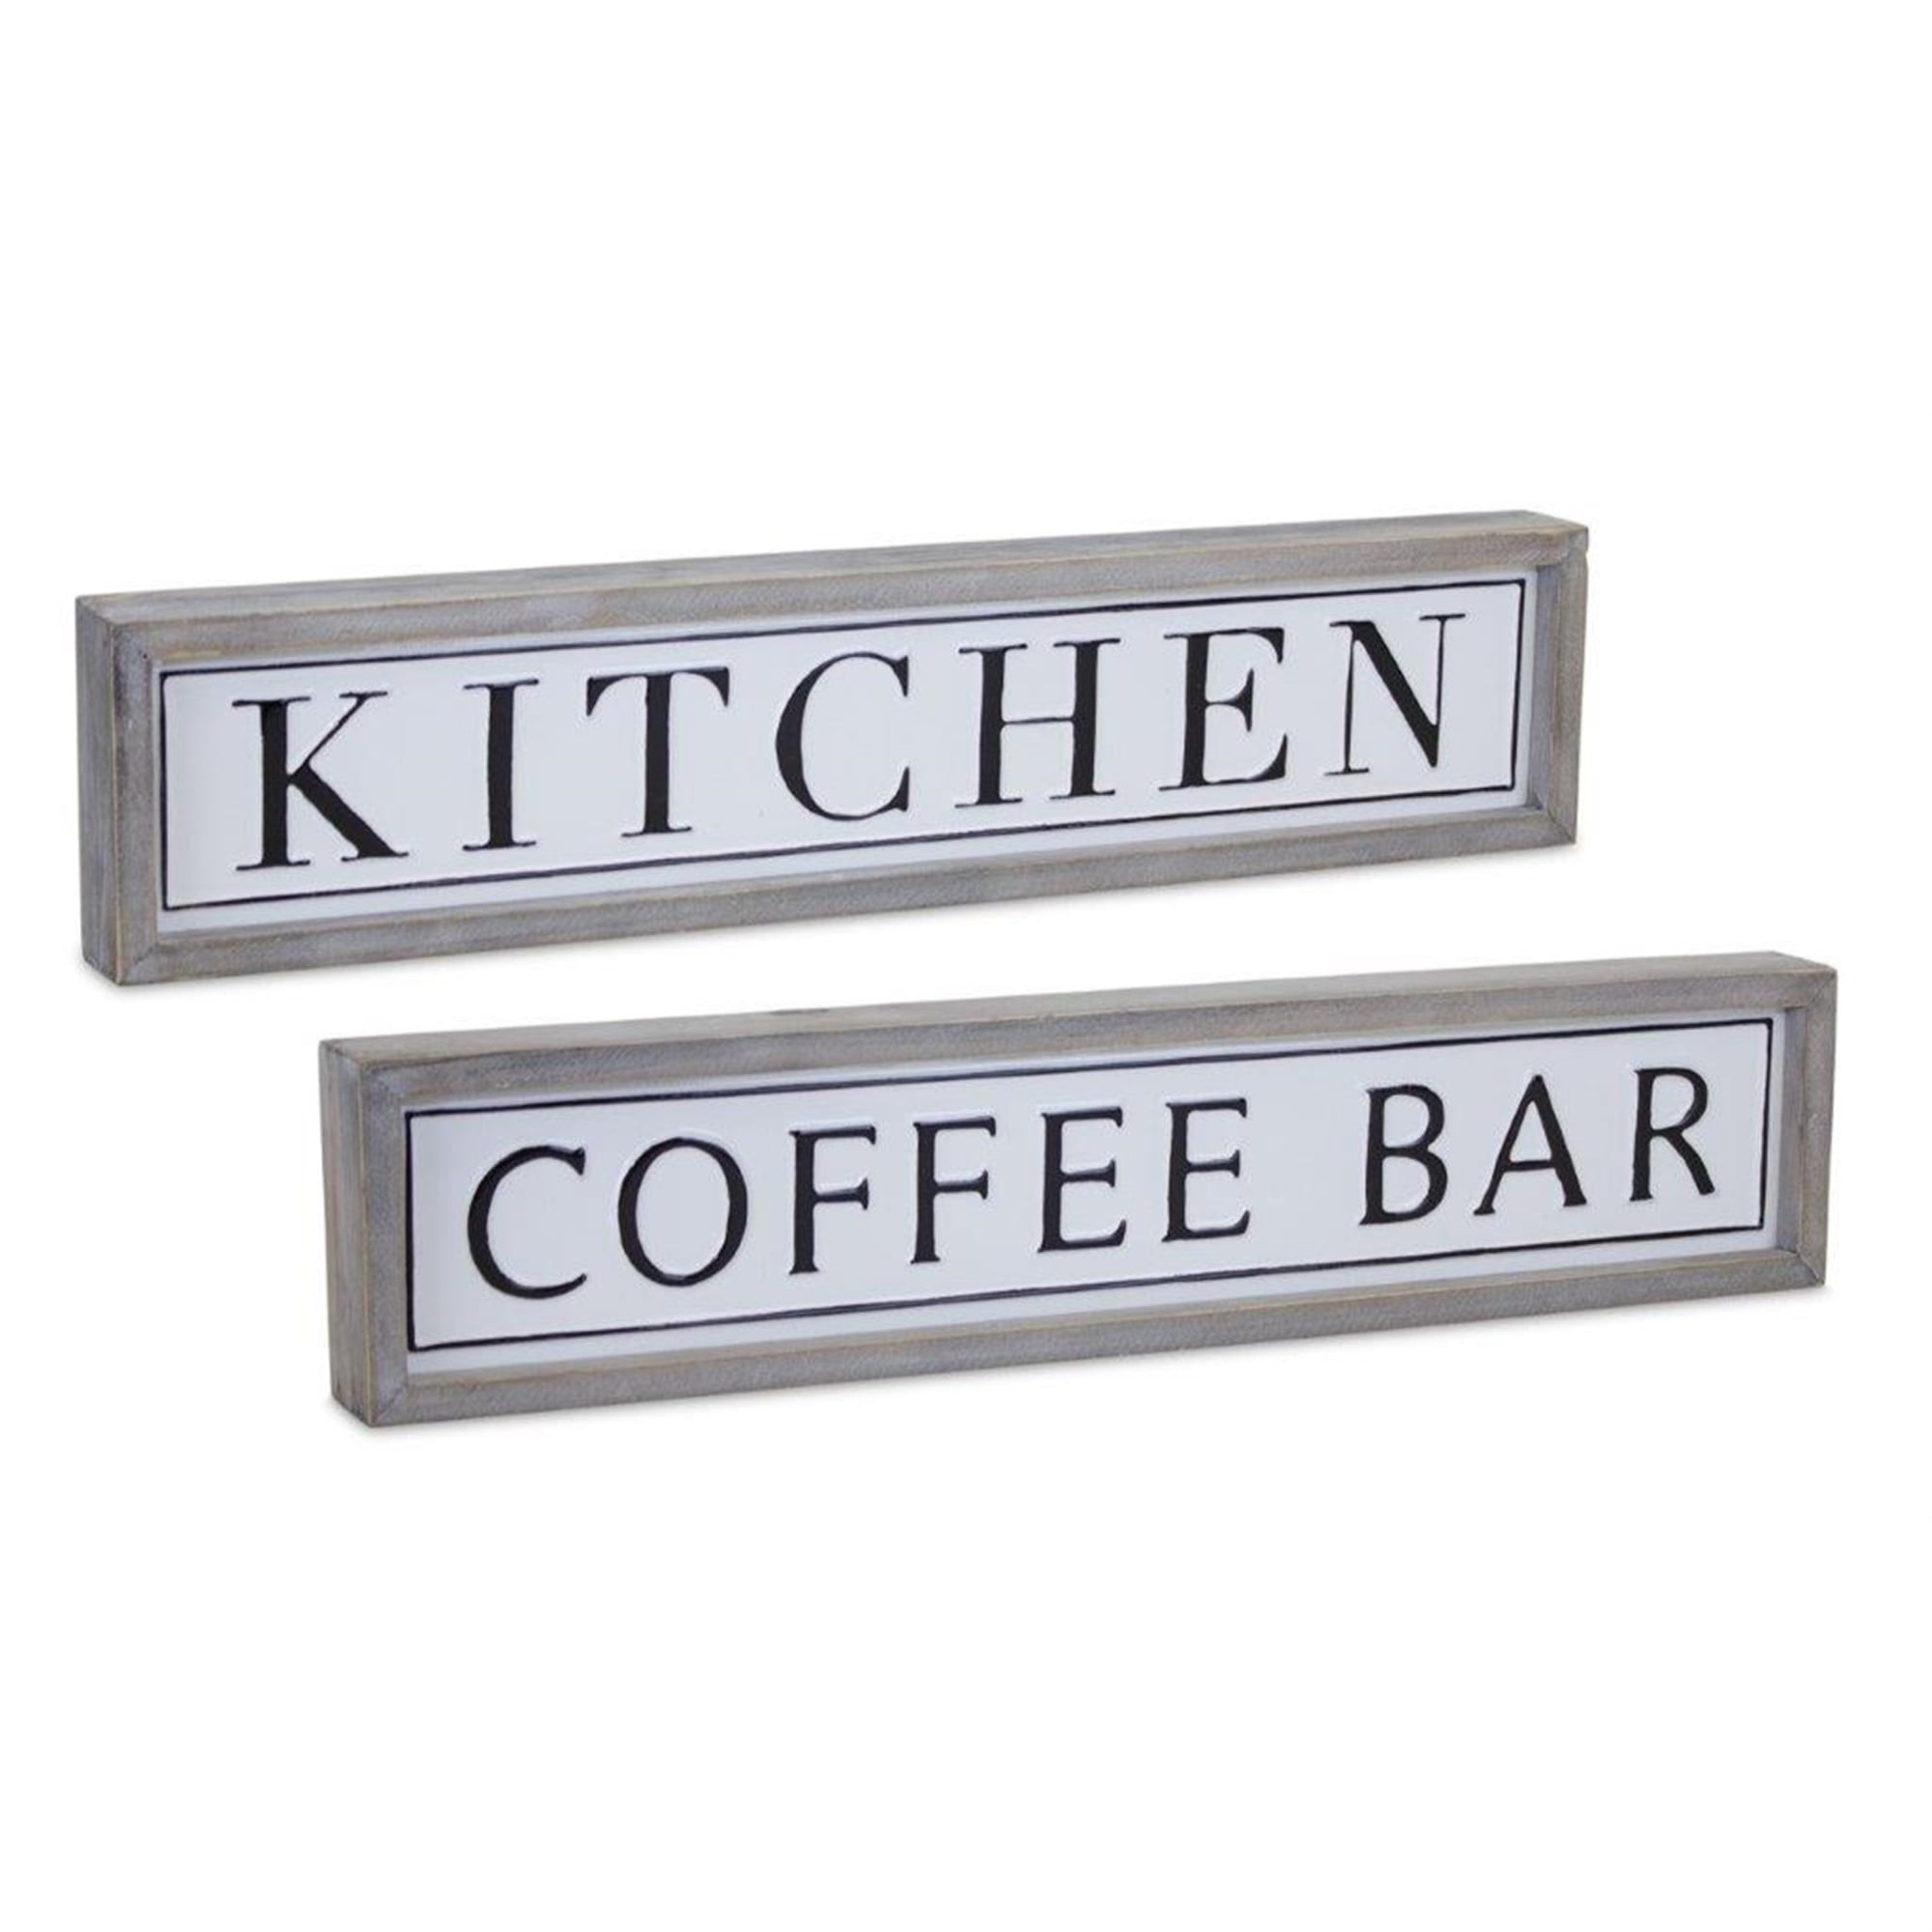 Coffee Bar and Kitchen Sign (Set of 2) 19"L x 4"H Wood/Metal